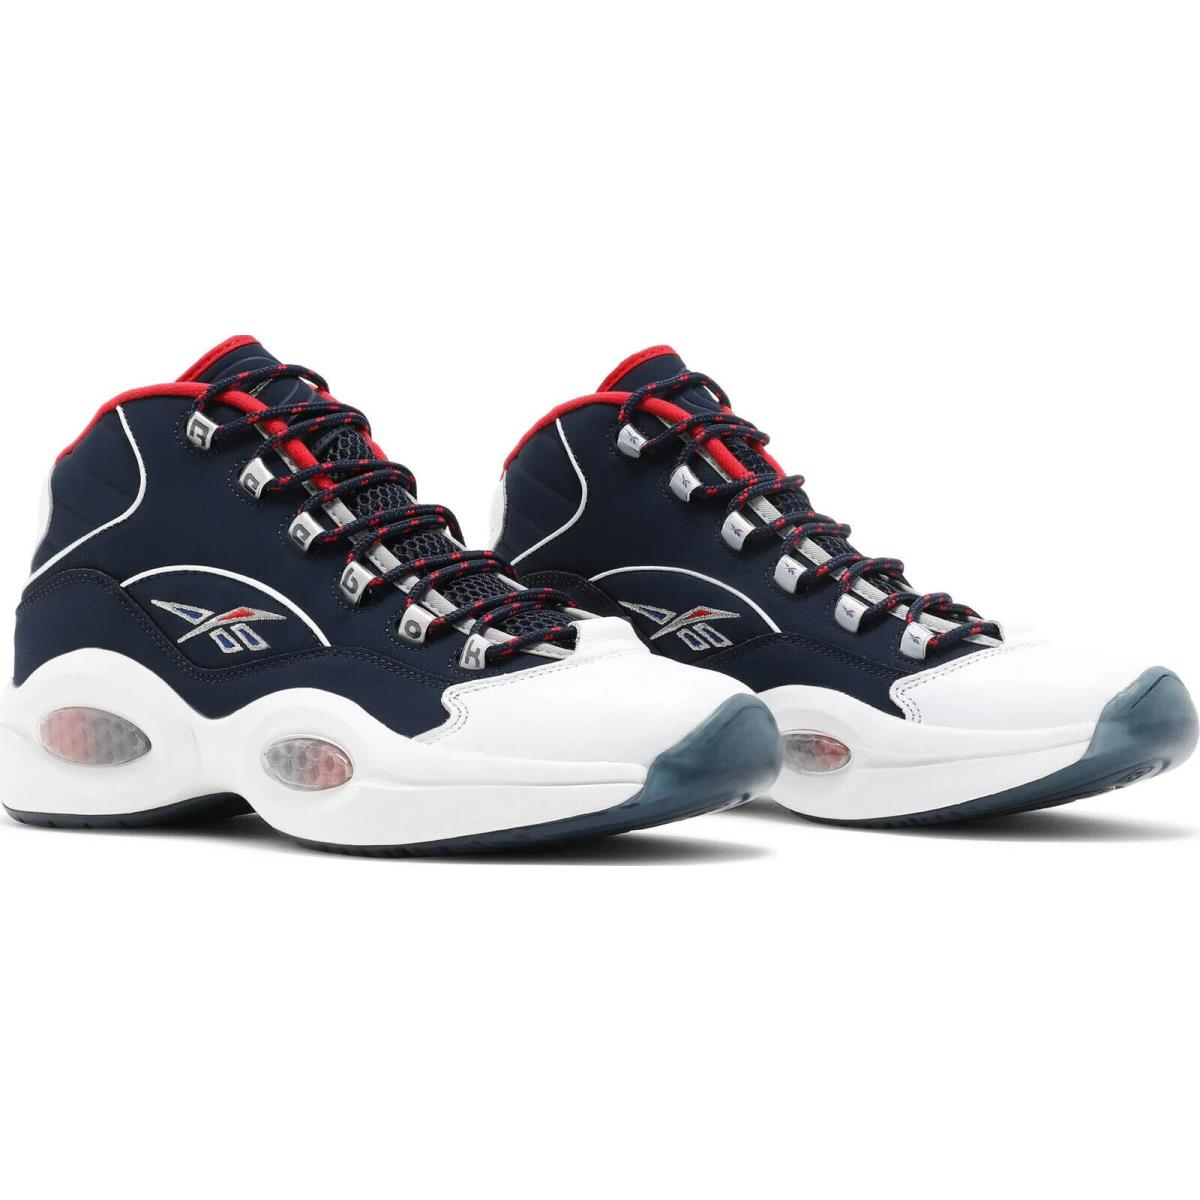 Reebok Question Mid Men`s Basketball Shoes - Navy White Red - Size 9